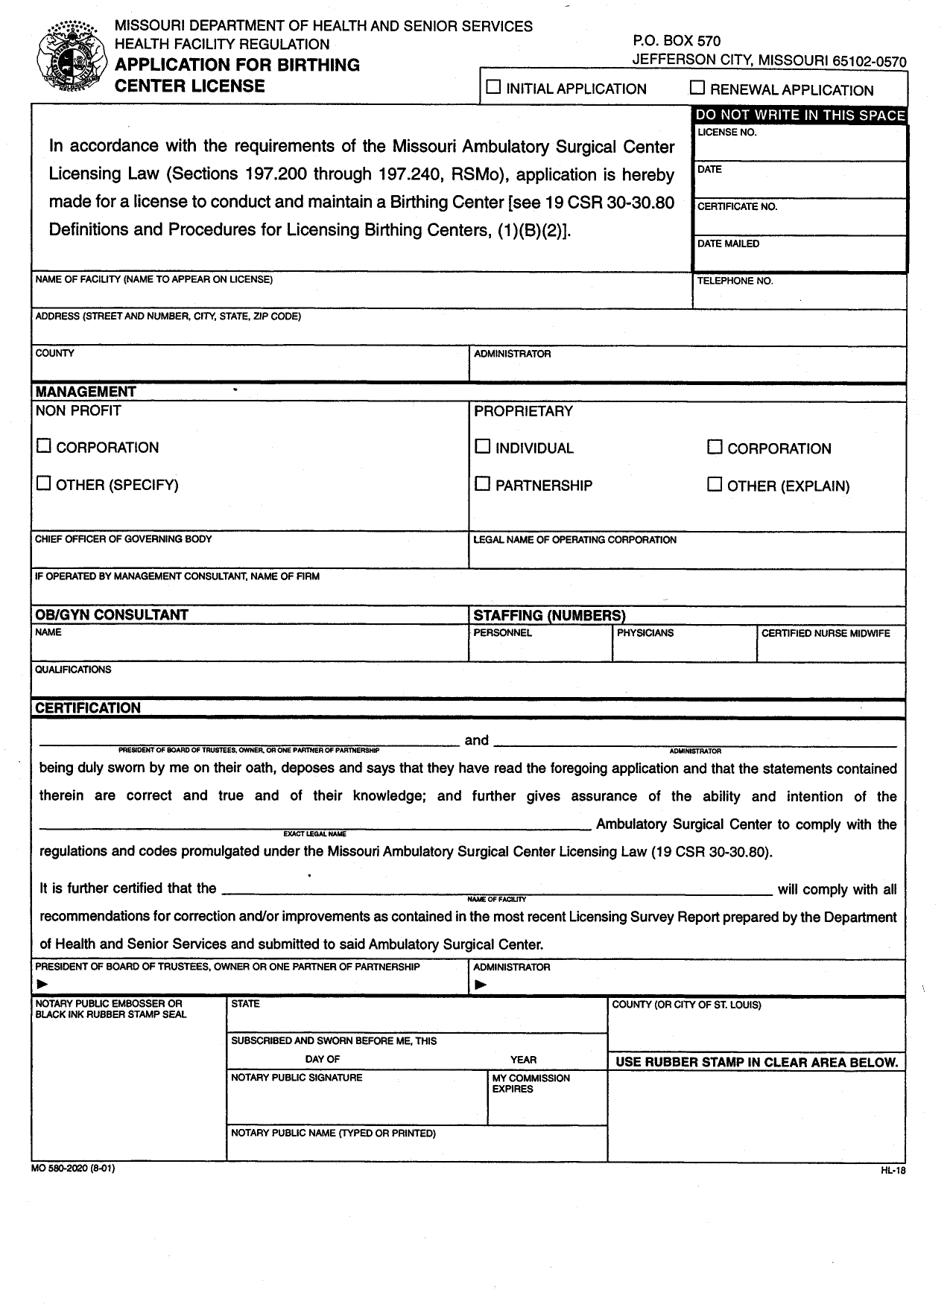 Form MO580-2020 Application for Birthing Center License - Missouri, Page 1